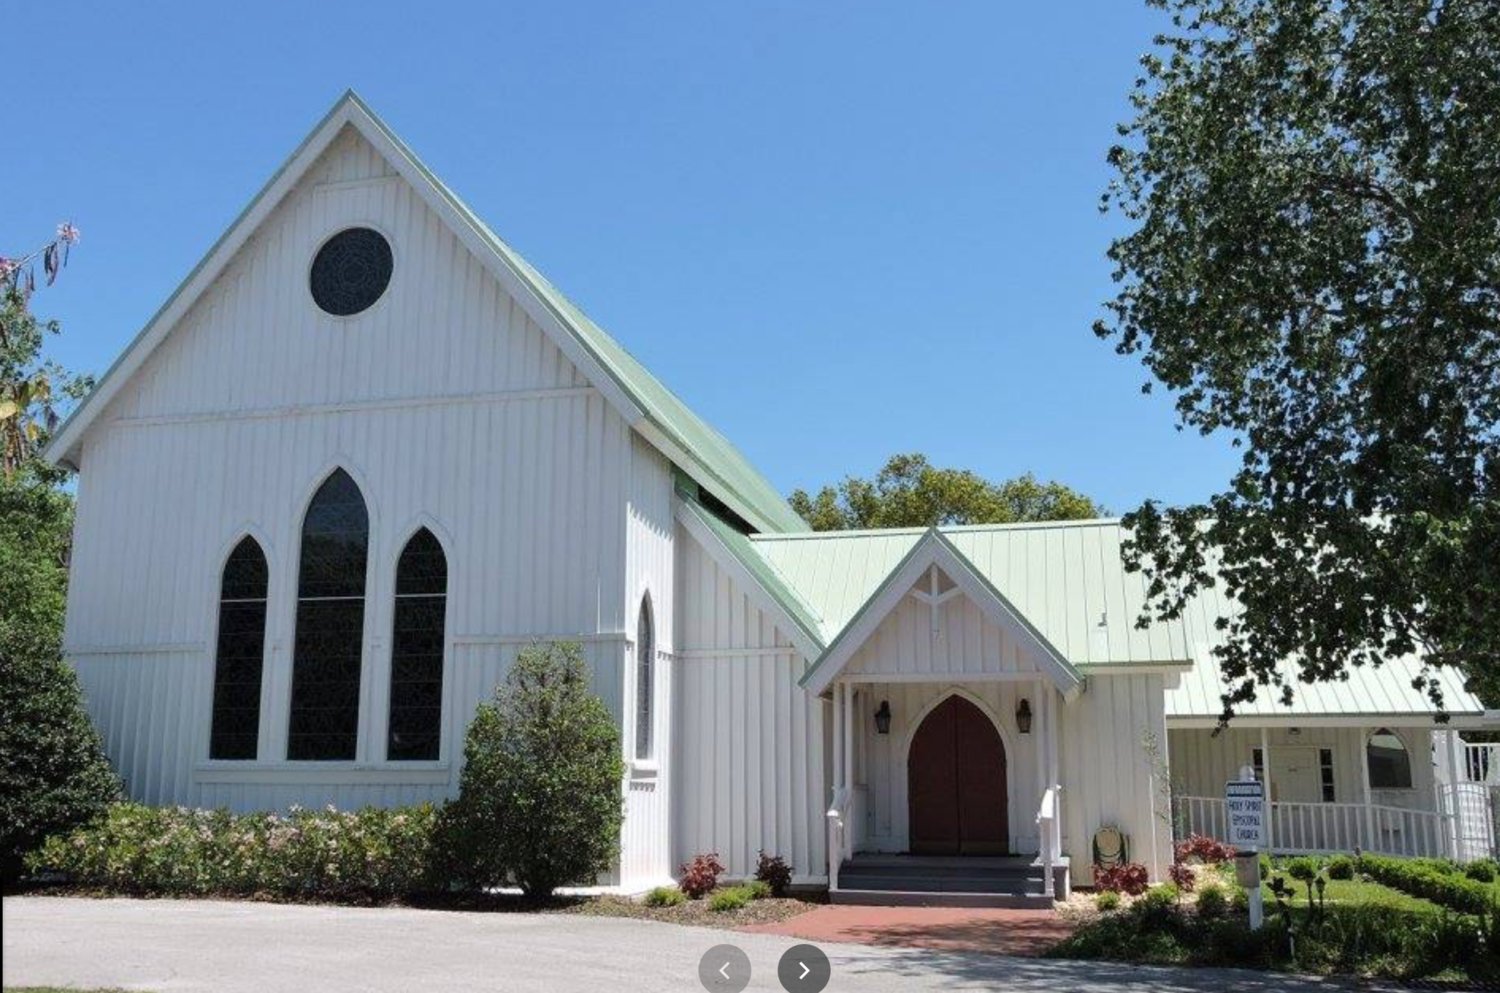 Church of the Holy Spirit - The little church began as a simple rectangular wooden structure in 1866. In 1970, the church was moved to its current location.